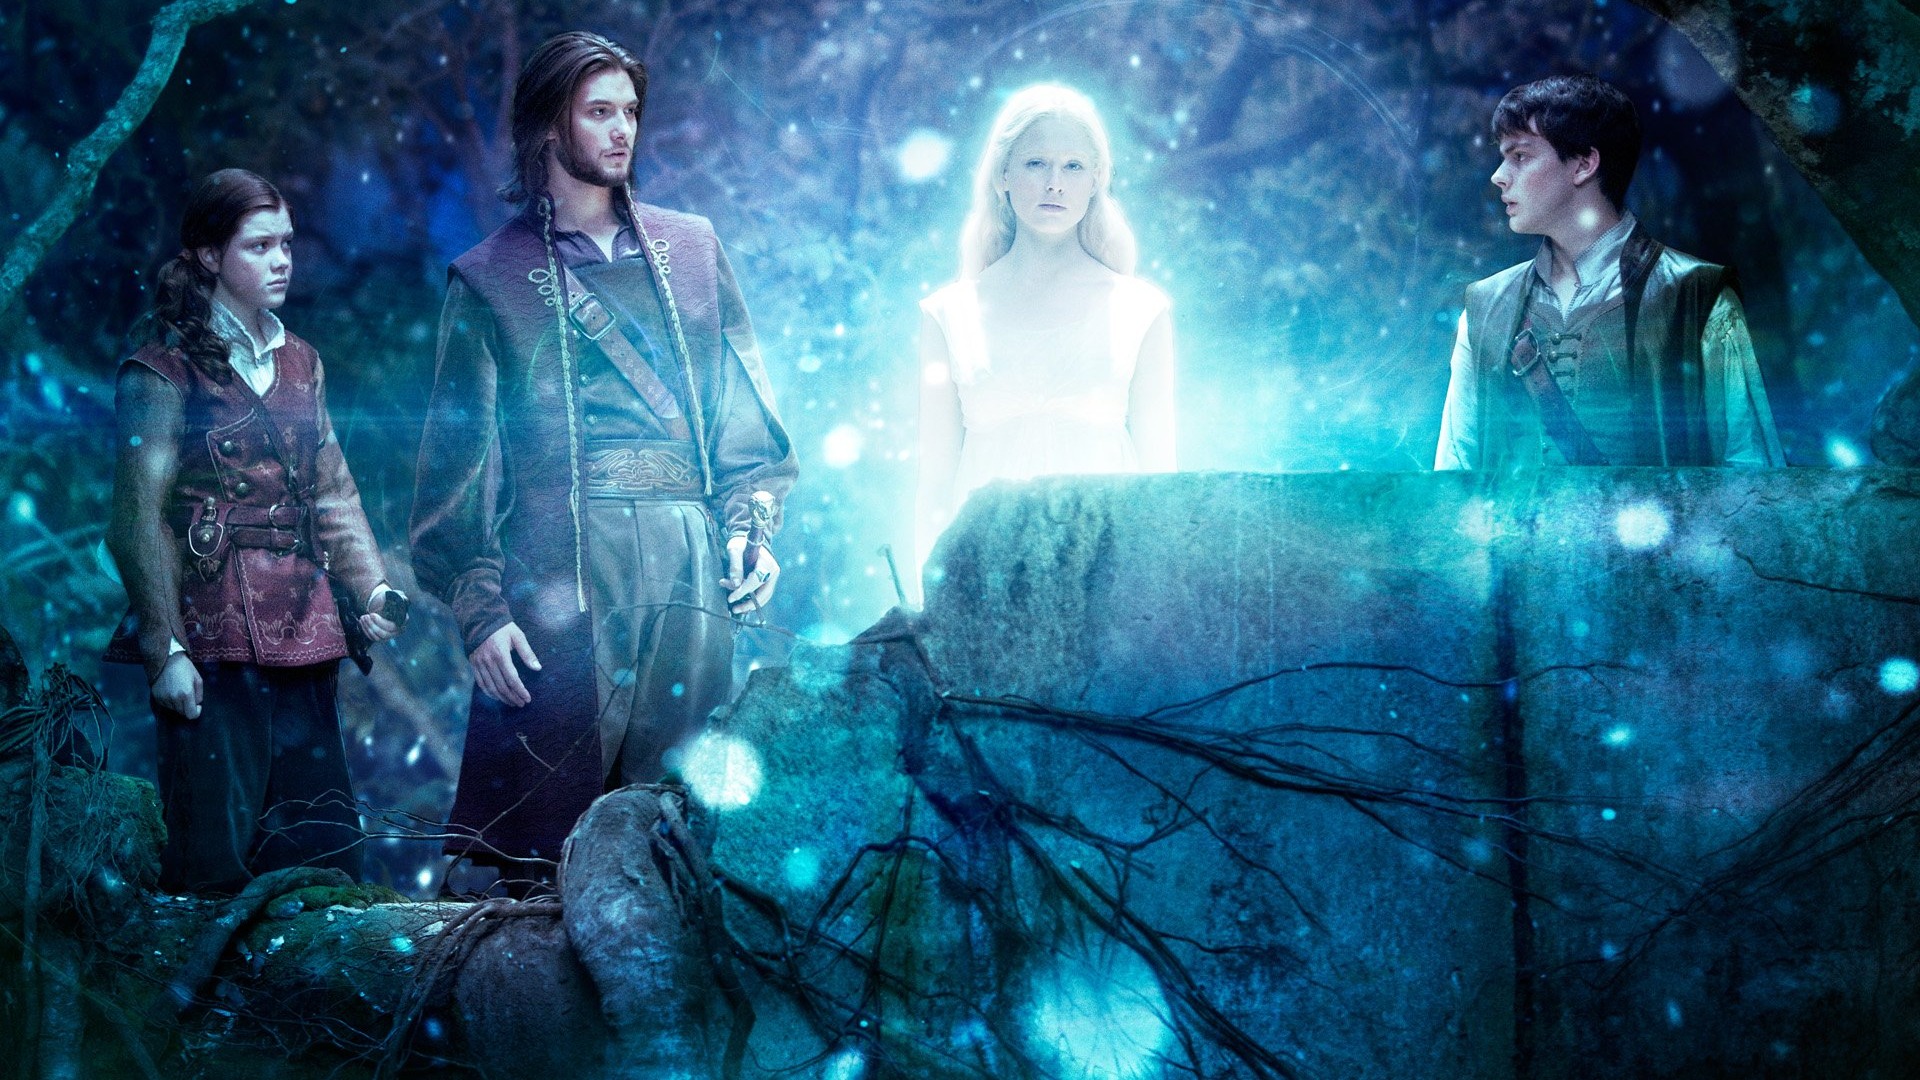 The Chronicles of Narnia: The Voyage of the Dawn Treader wallpapers #5 - 1920x1080